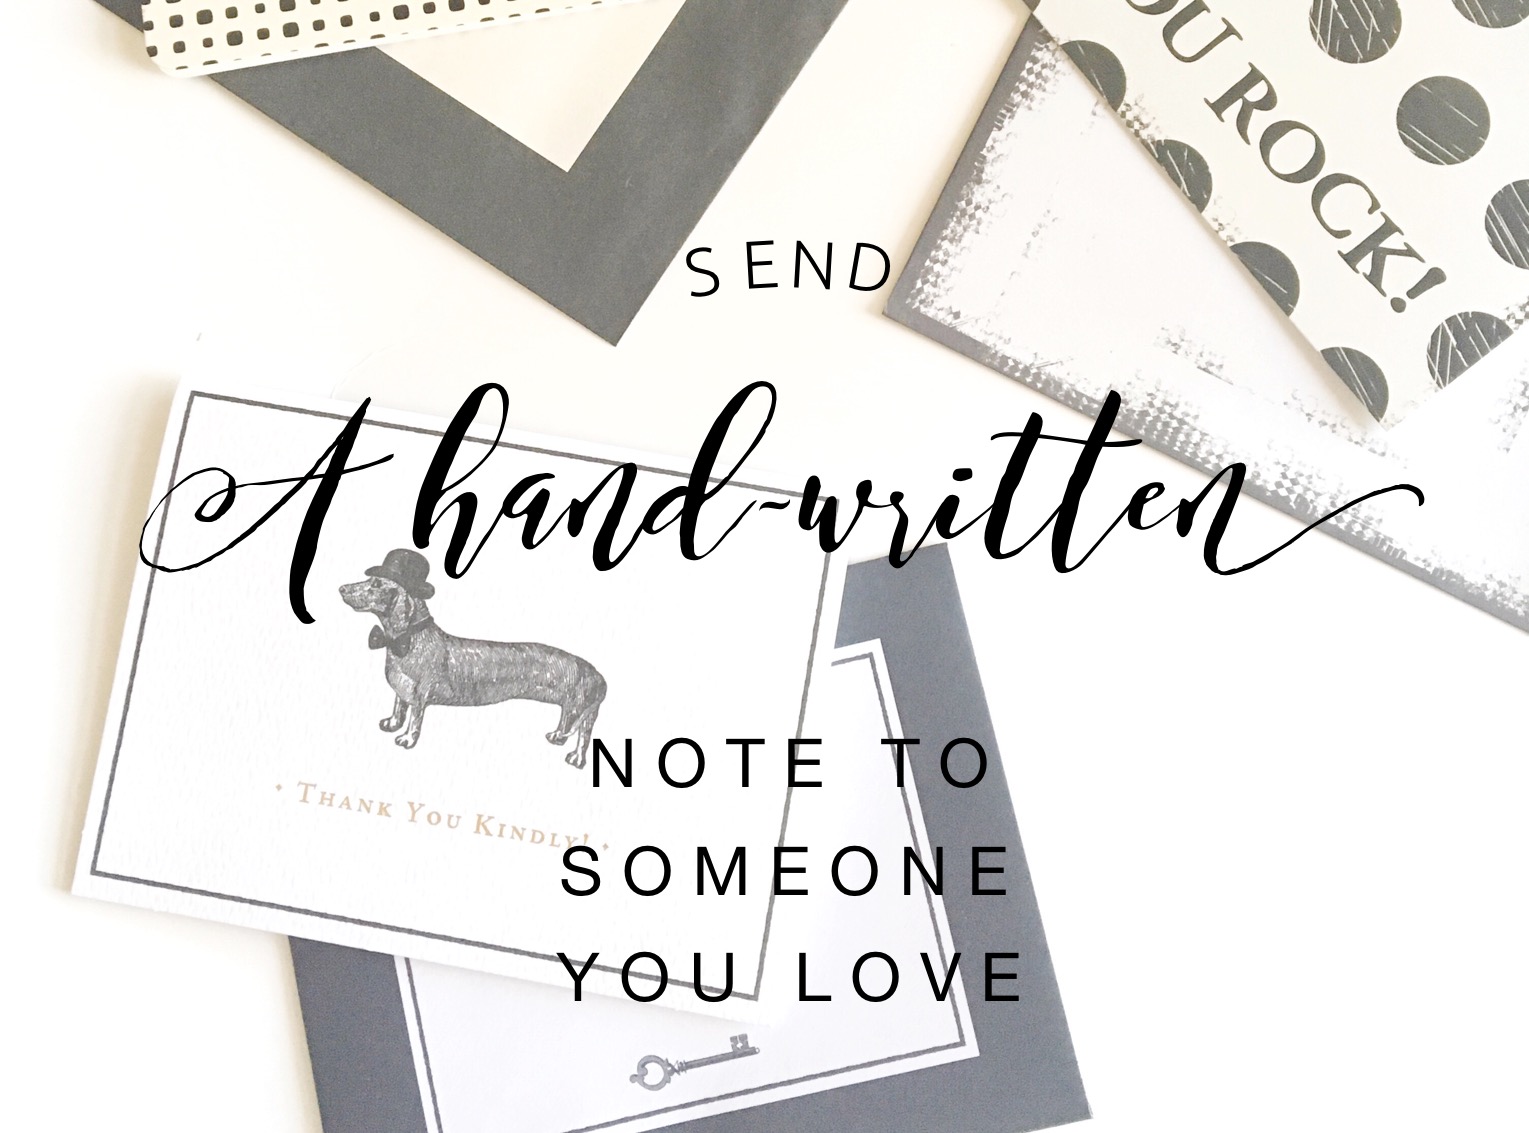 Send a hand-written note to someone you love